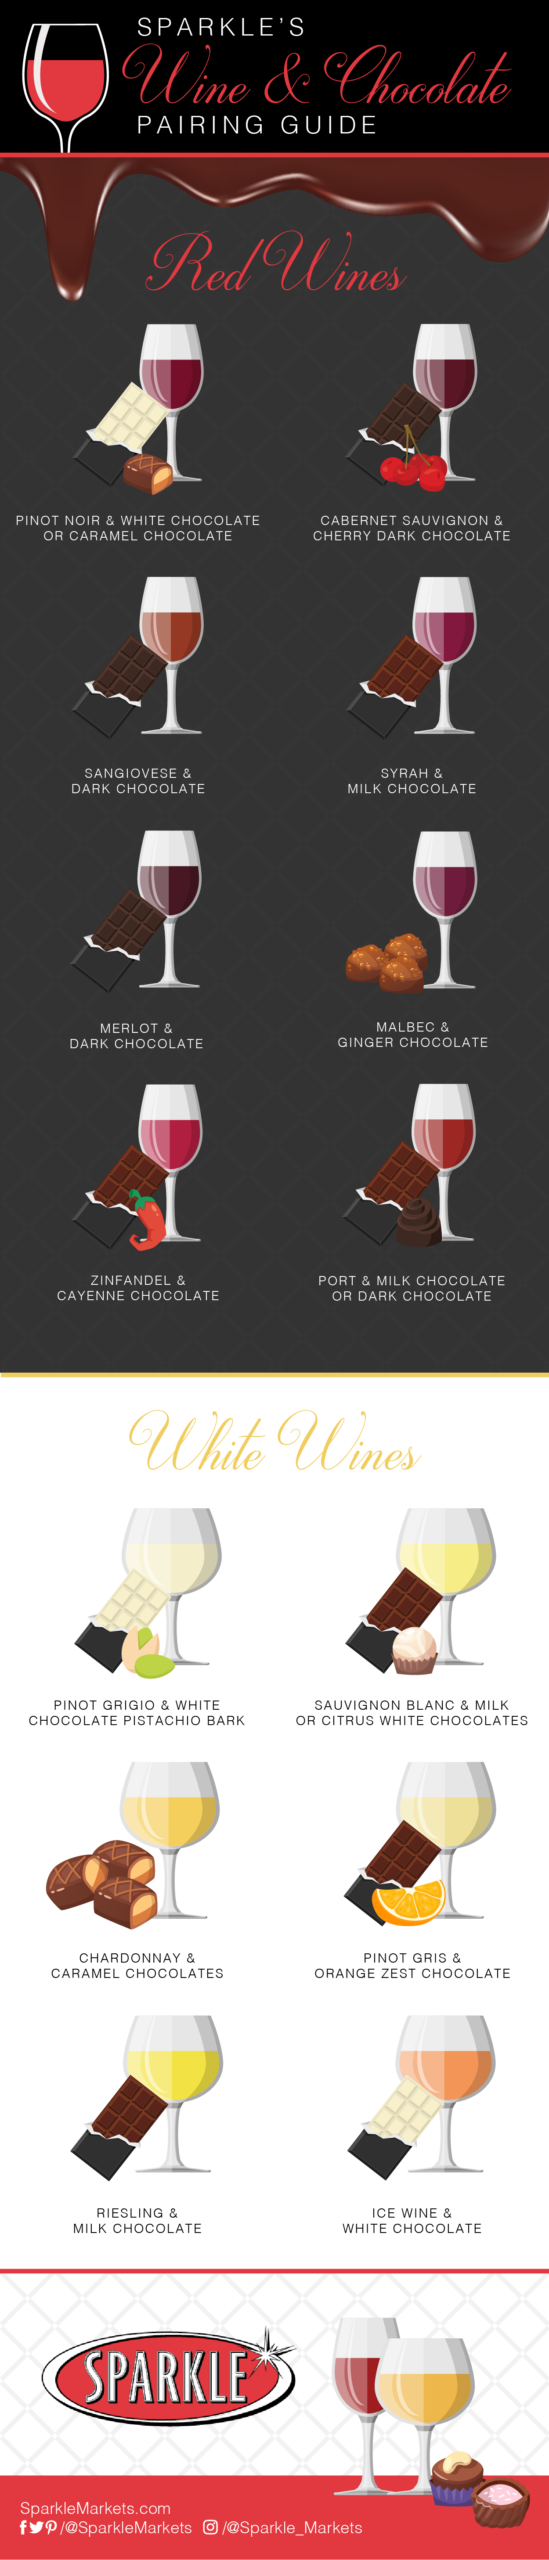 Sparkle Wine and Chocolate Pairing Guide